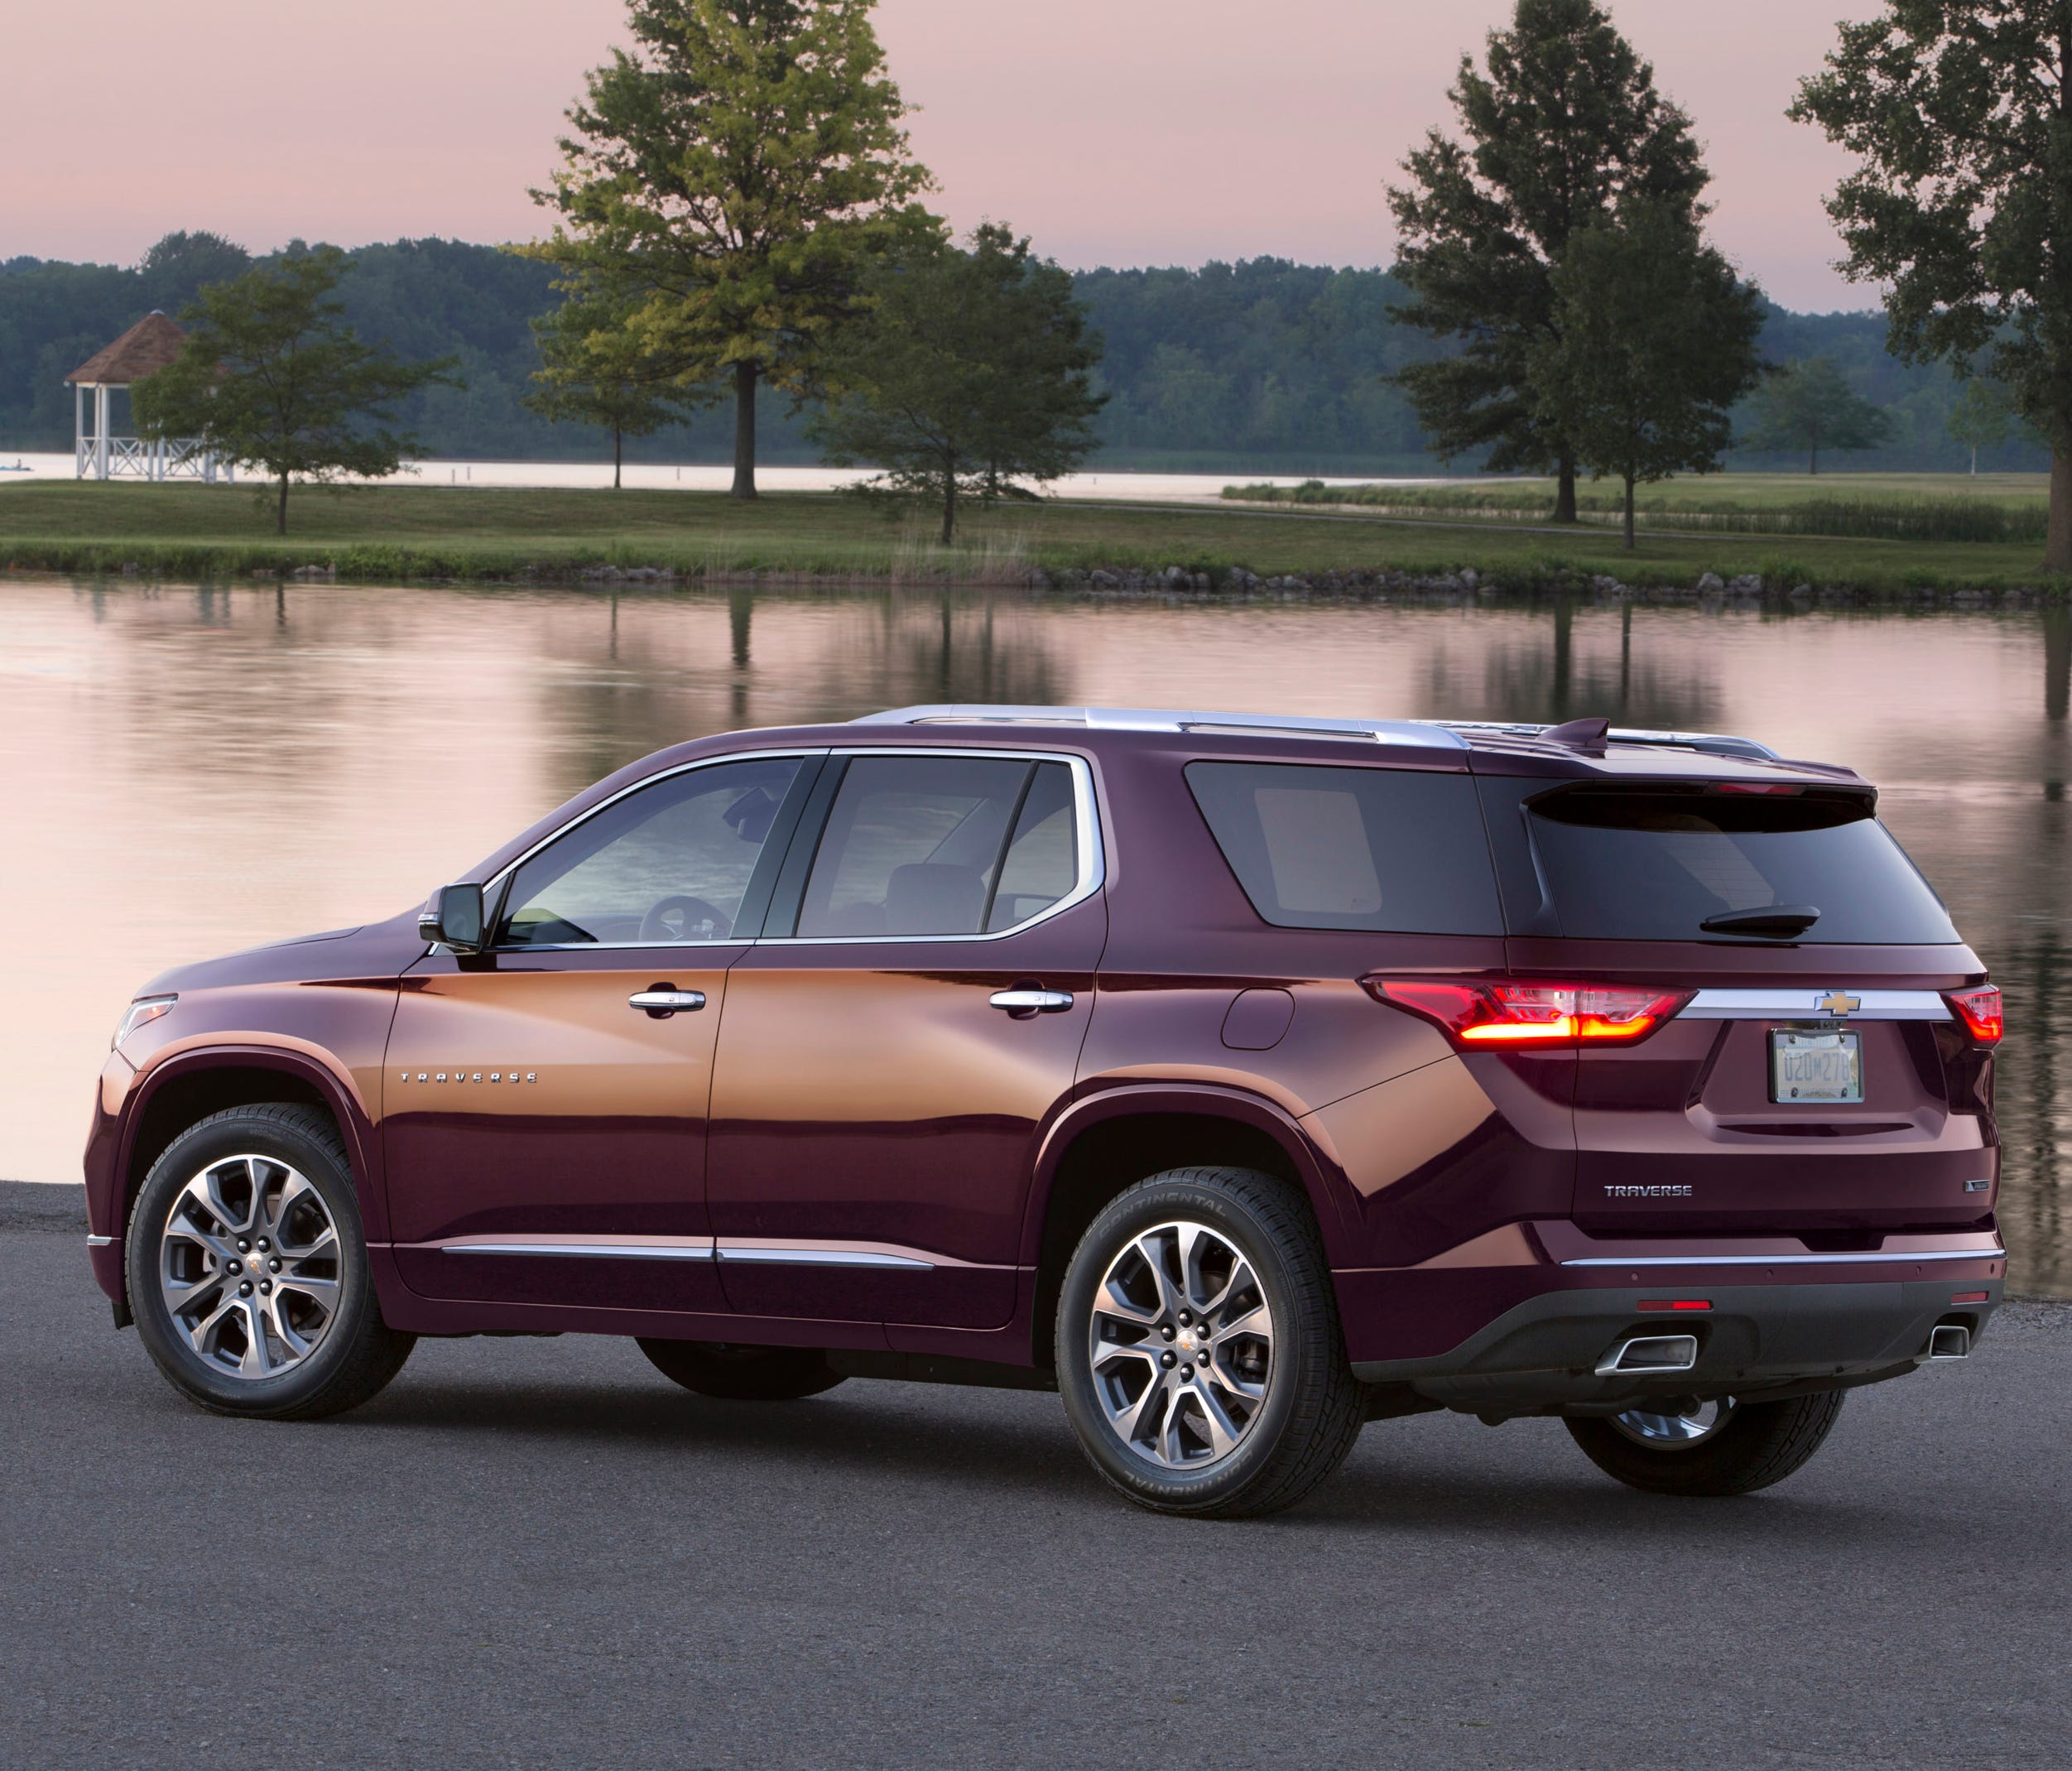 The completely redesigned 2018 Chevrolet Traverse is a seven-passenger SUV.